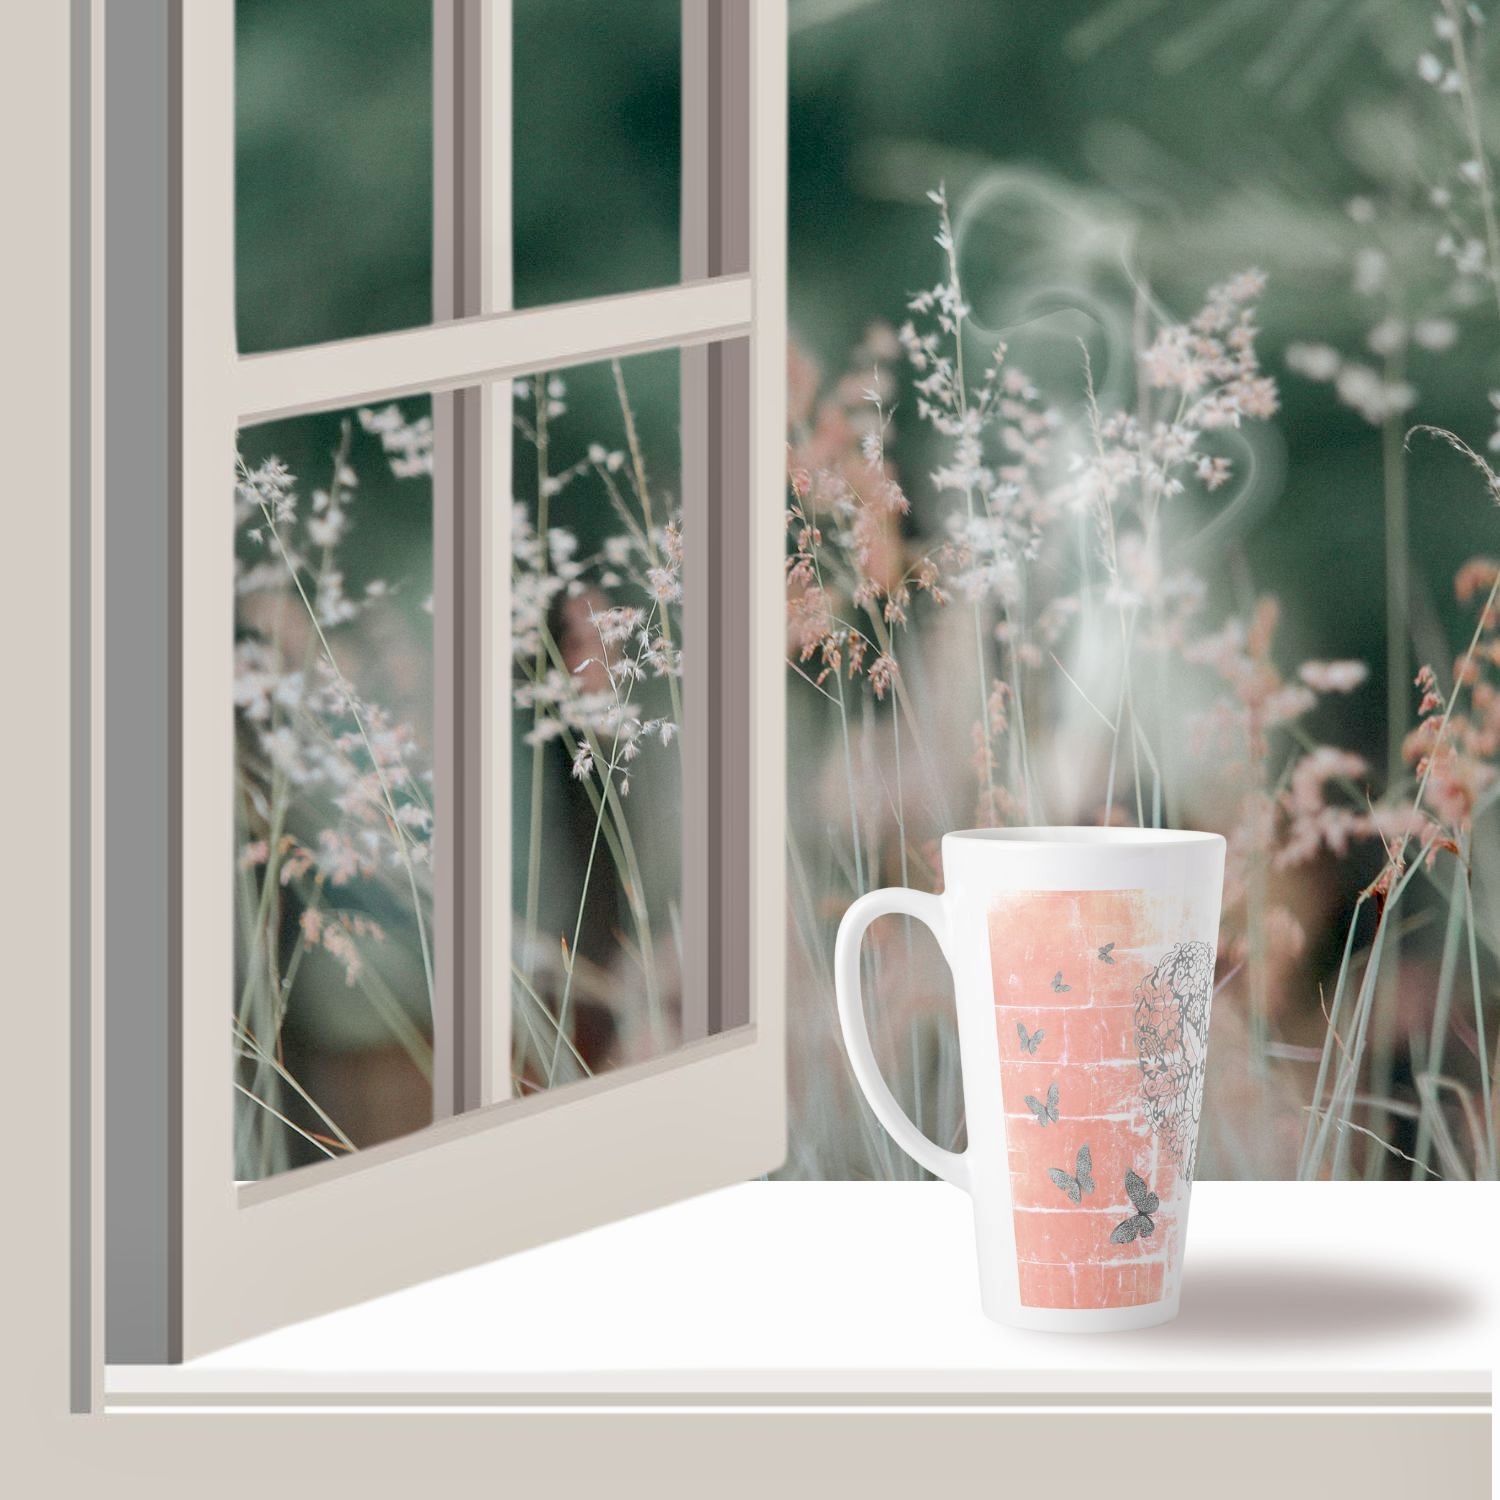 A latte mug standing on the edge of an open window, illuminated by soft natural light.